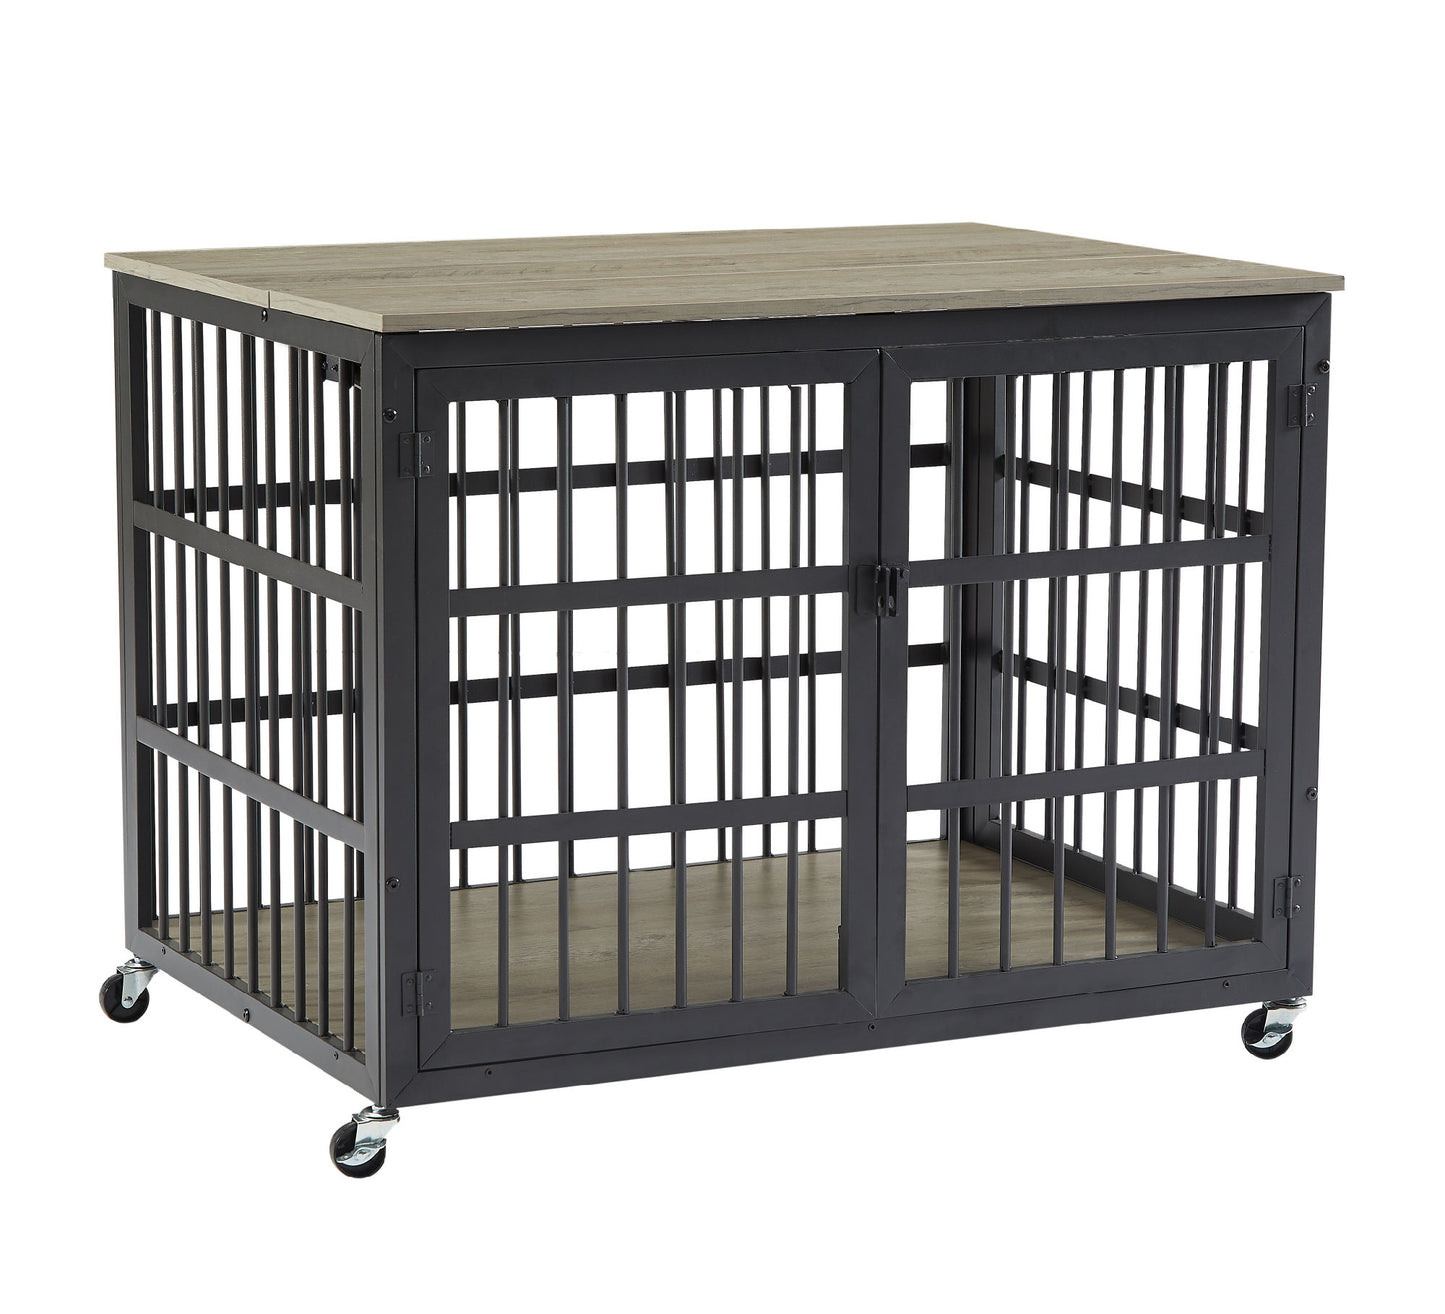 Furniture style dog crate wrought iron frame door with side openings, Grey, 38.4''W x 27.7''D x 30.2''H.